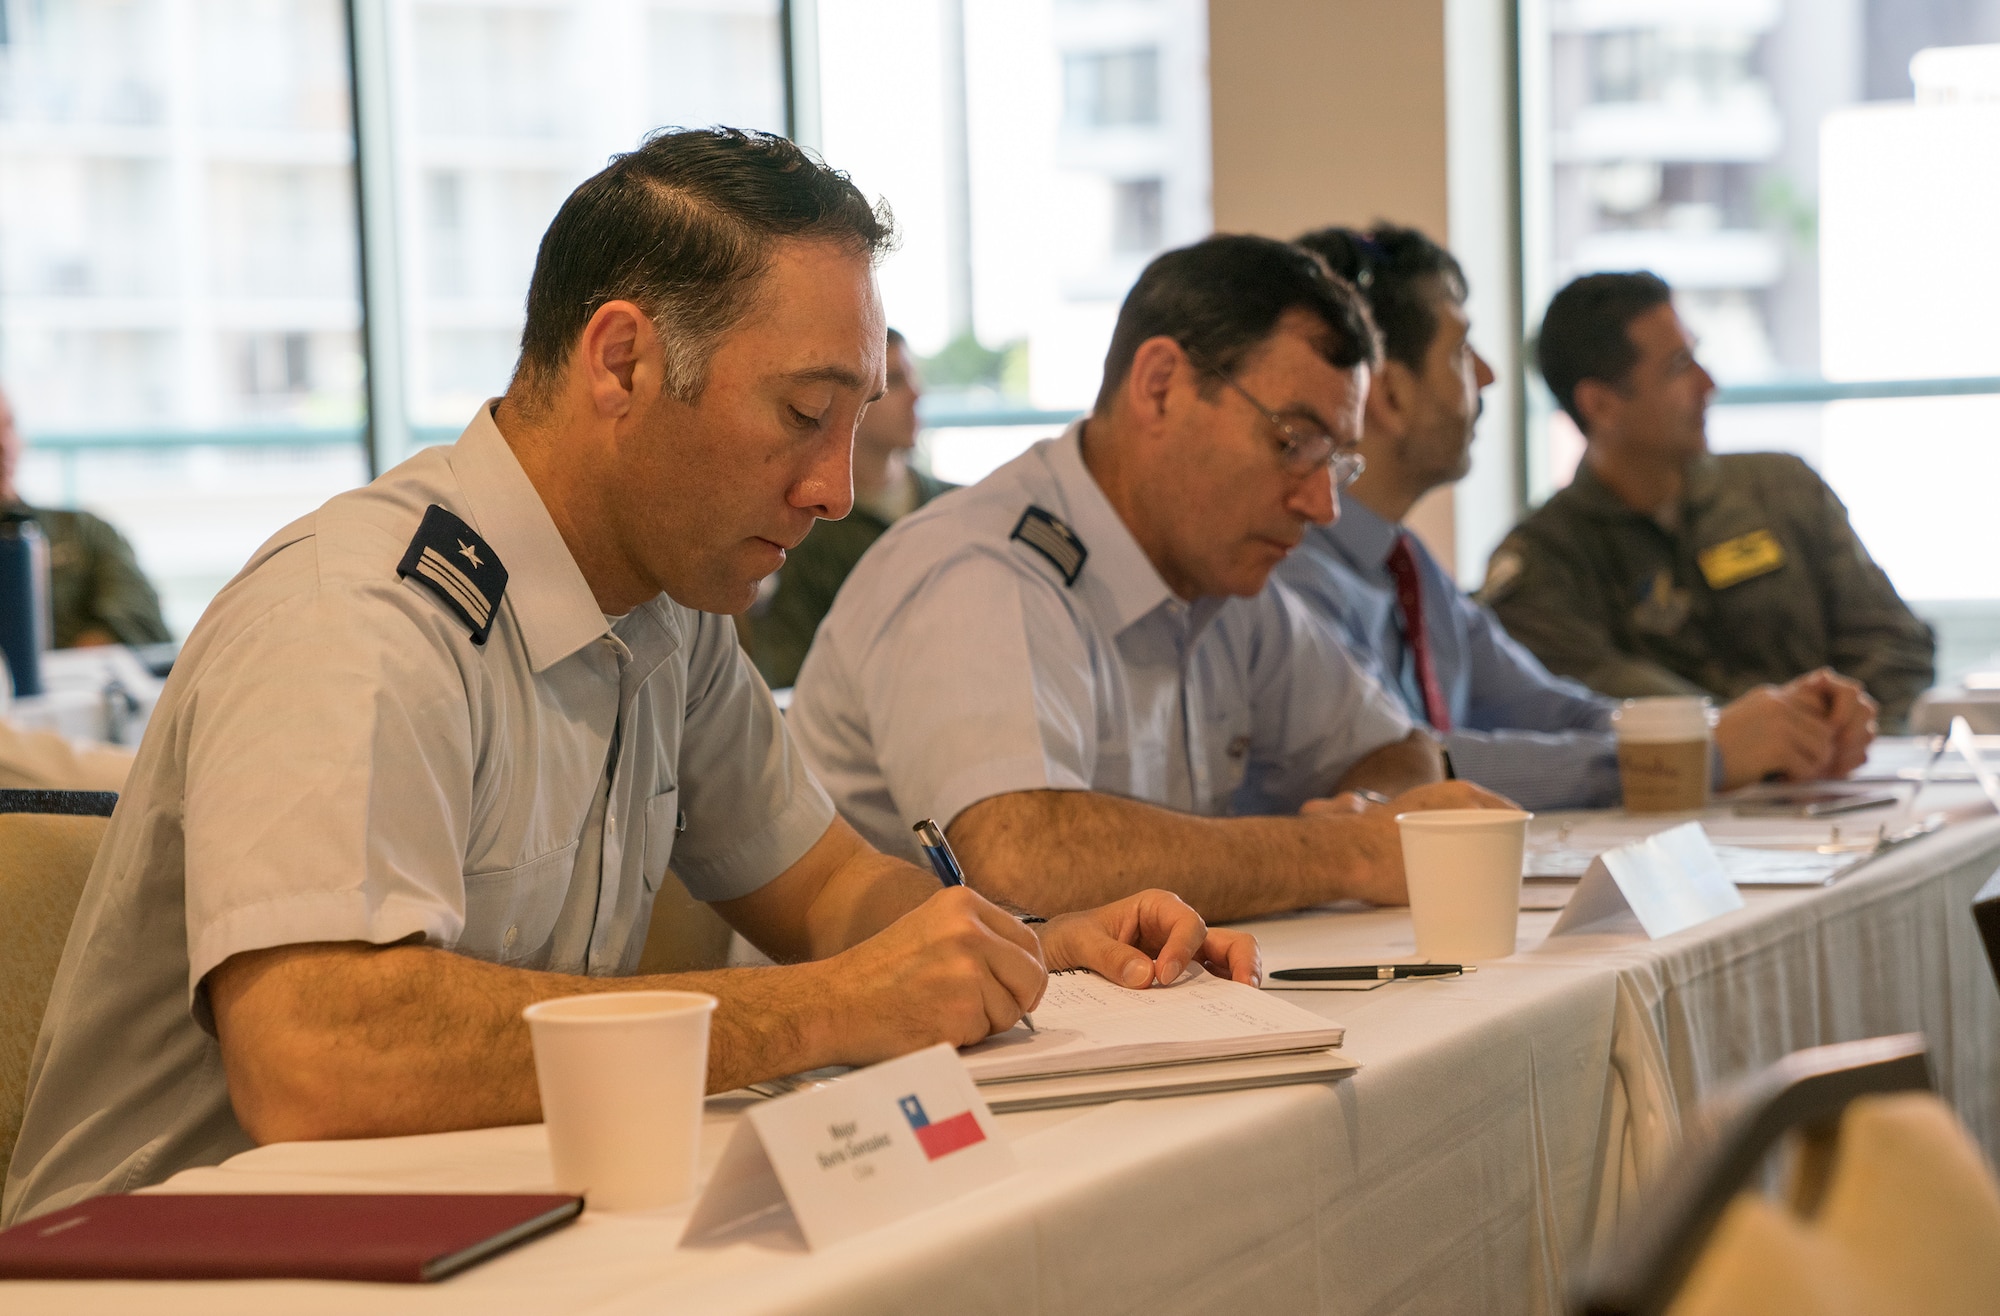 Chilean air force Maj. Boris Gonzalez (left) and Chilean air force Col. Sergio Figueroa (right) take notes during the resource and risk management presentation of the Asia-Pacific Aviation Safety Subject Matter Expert Exchange (APASS) in Honolulu, Hawaii, Aug. 14, 2018. APASS allows partner nations to discuss aviation safety practices and devise solutions to challenges faced by the various air forces. (U.S. Air Force photo by Staff Sgt. Daniel Robles)